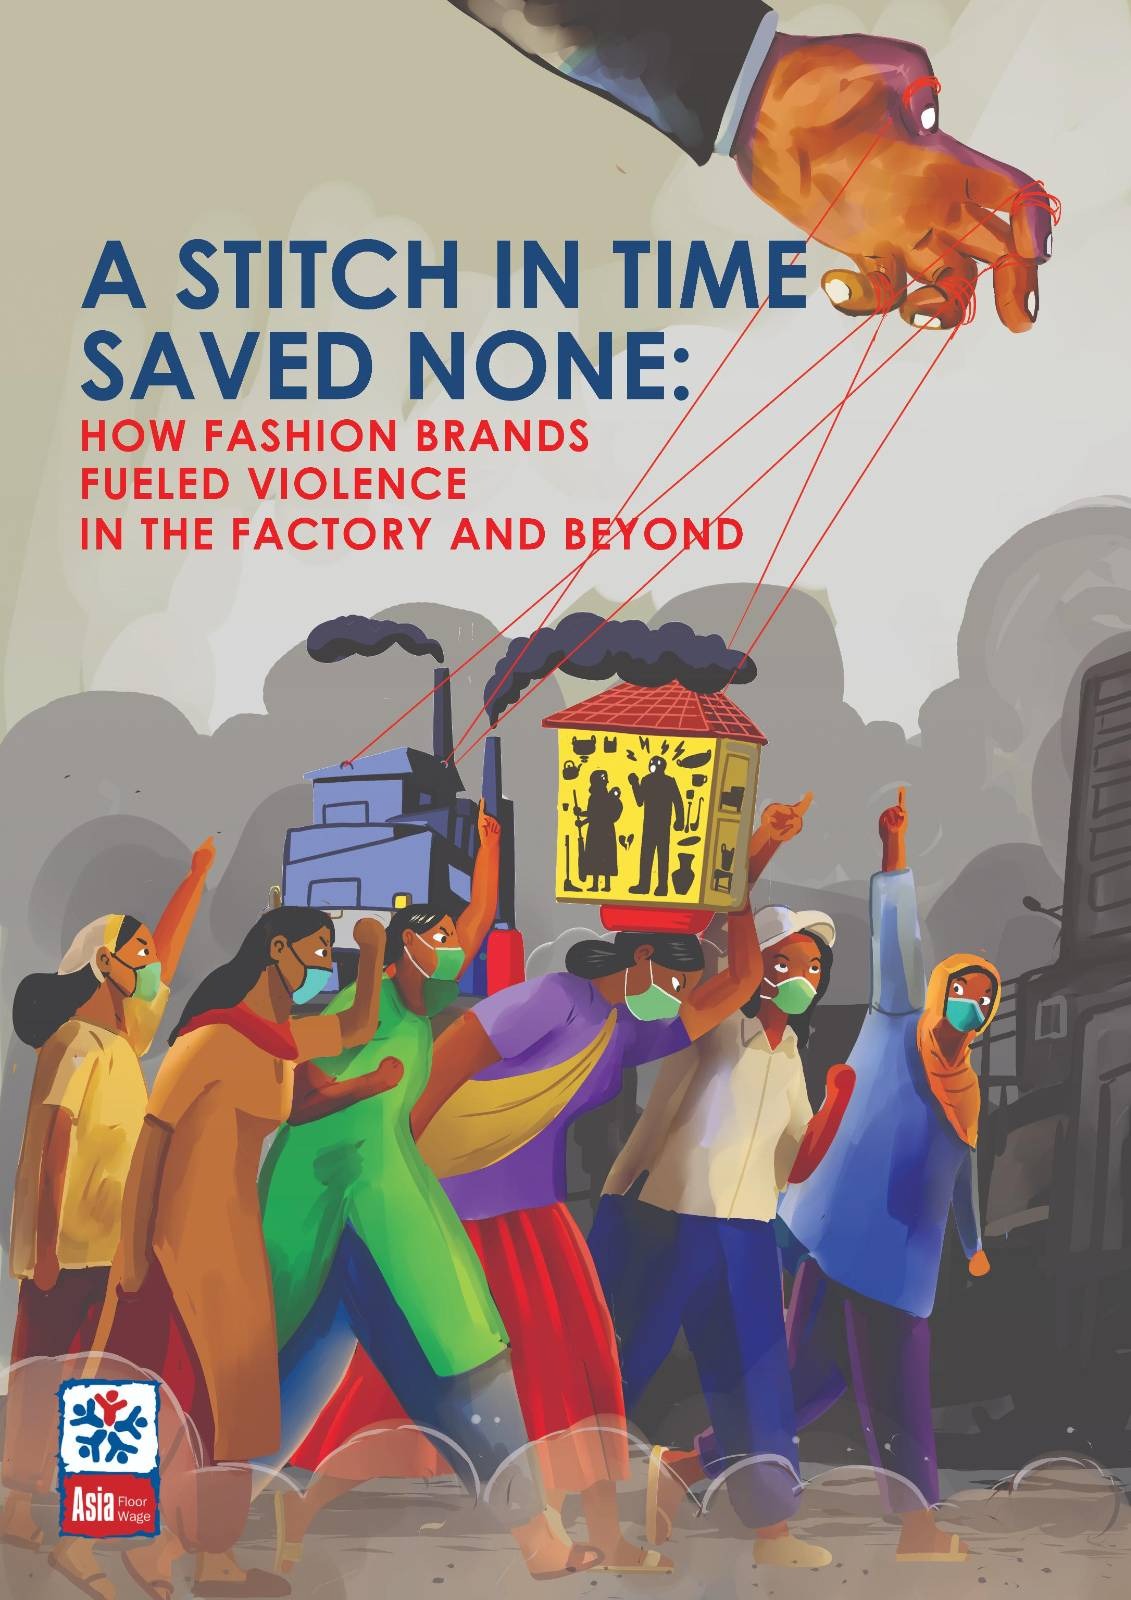 A Stitch in Time Saved None: How Fashion Brands Fueled Violence